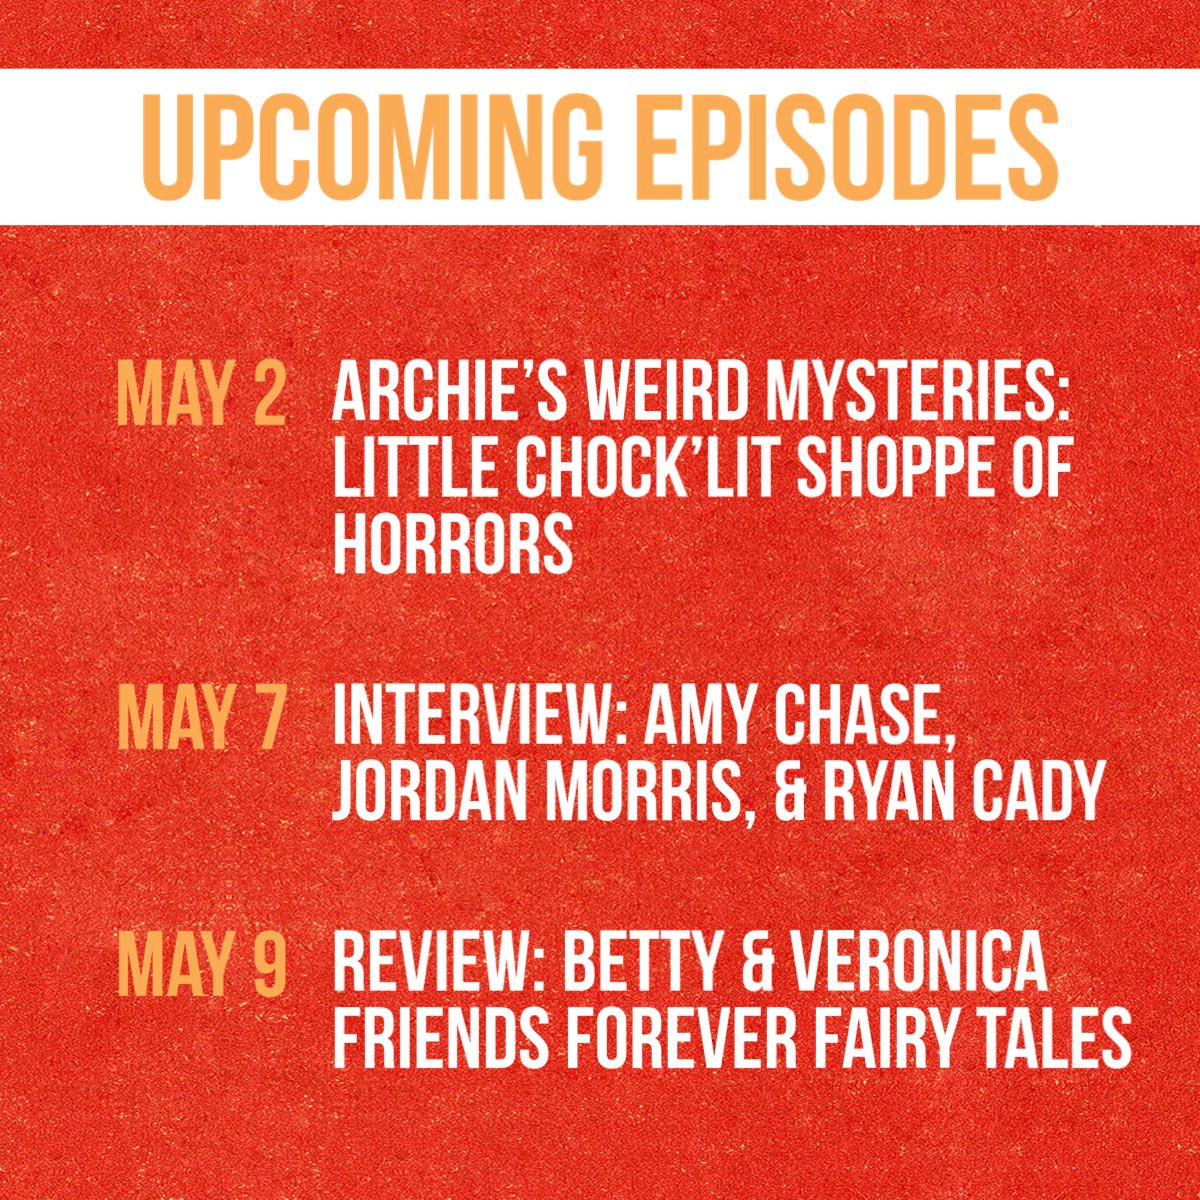 Change of plans! We’ll be reviewing the @ArchieComics Fairy Tales one-shot next week! Wanna see what we’ve got planned for the next three episodes? Check it out!